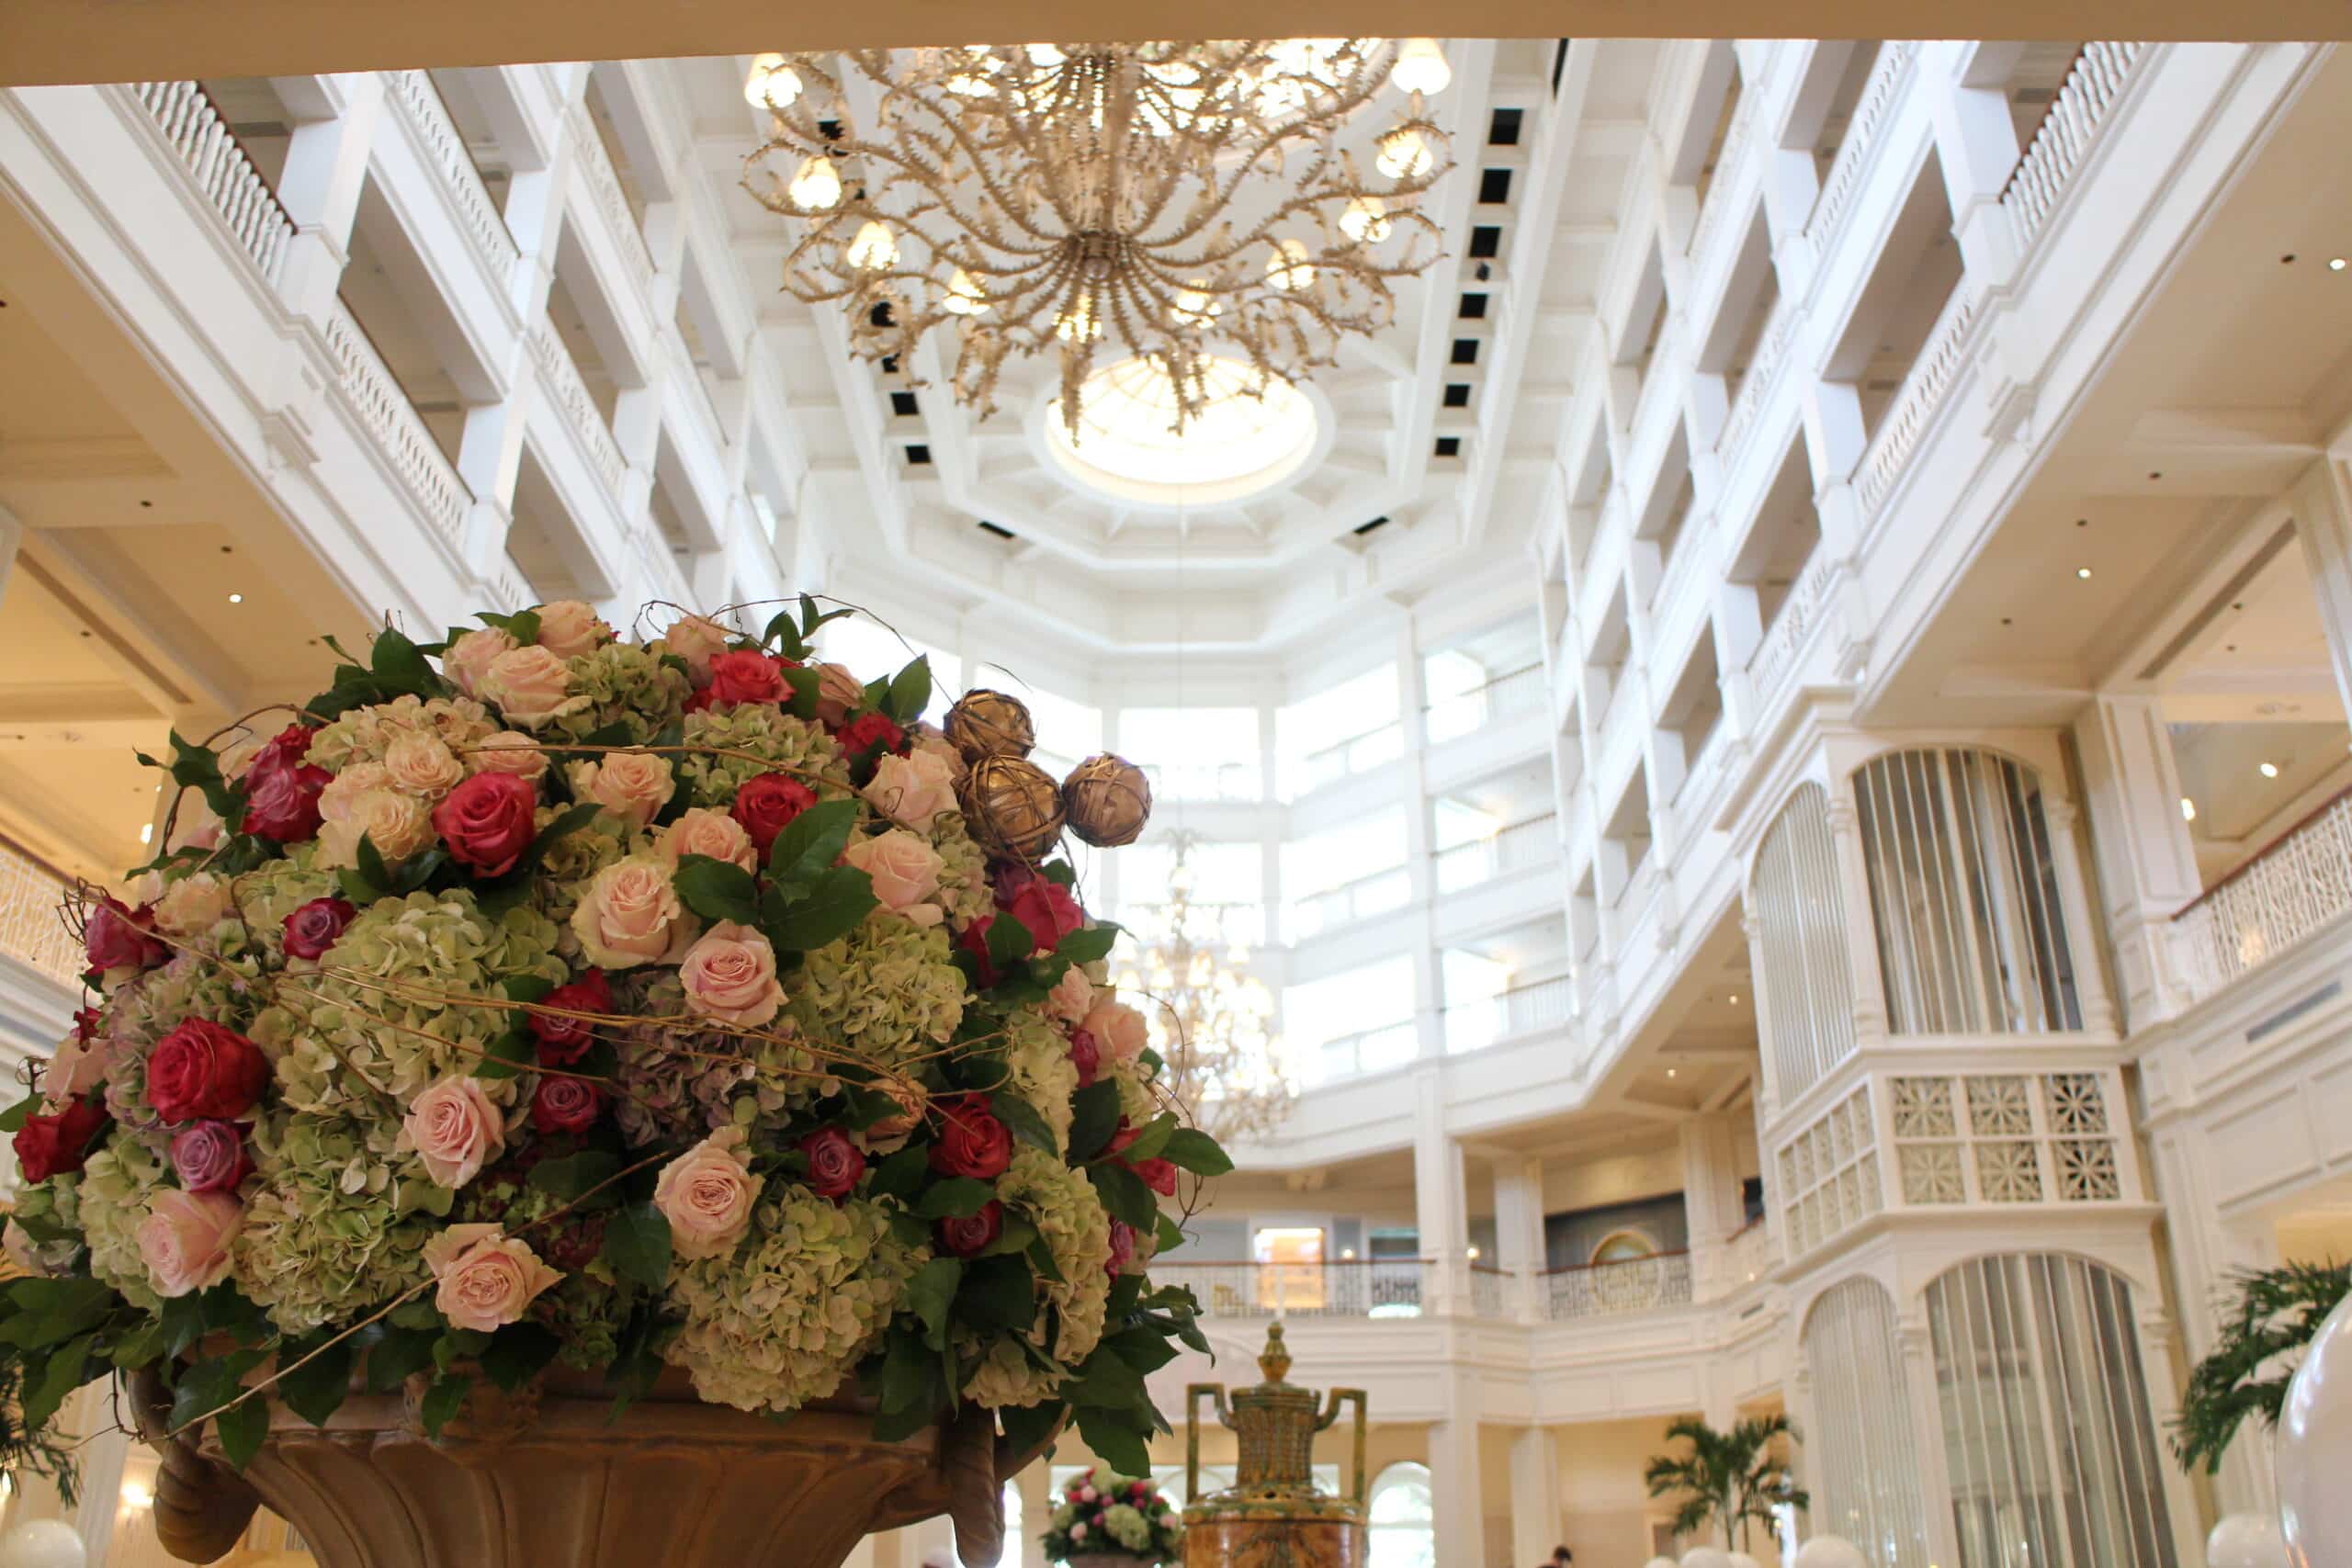 A rose and hydrangea floral arrangement in the Grand Floridian lobby.